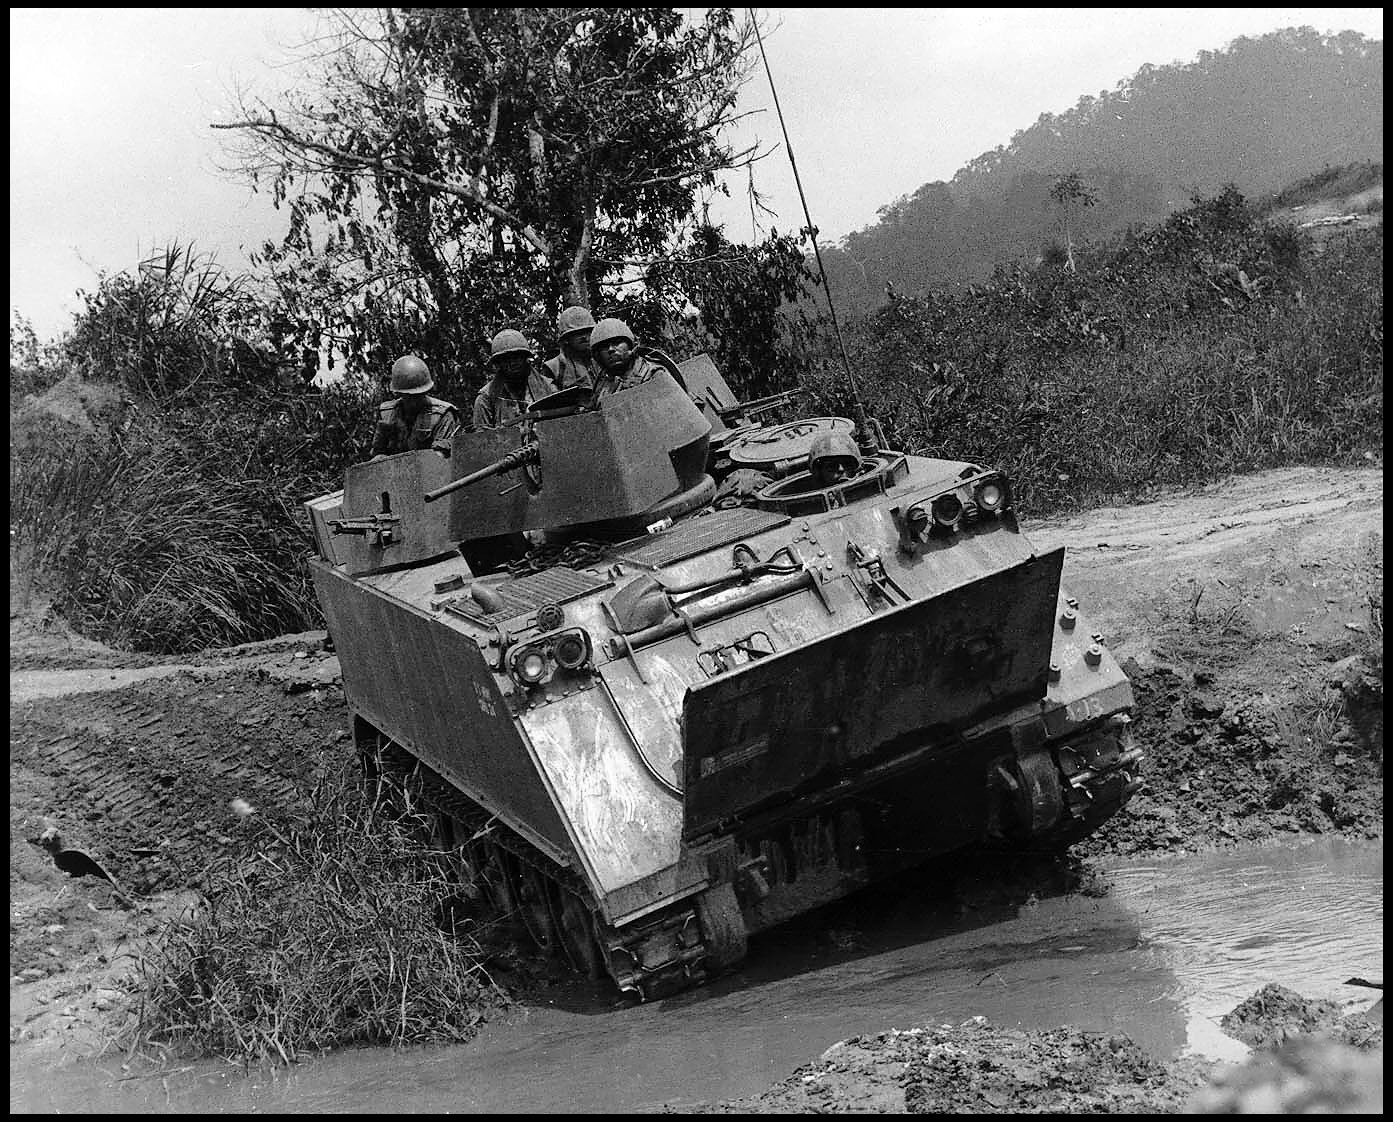 Photo of an M-113 Armored Personnel Carrier on the move in Vietnam, circa 1966. (U.S. Army)